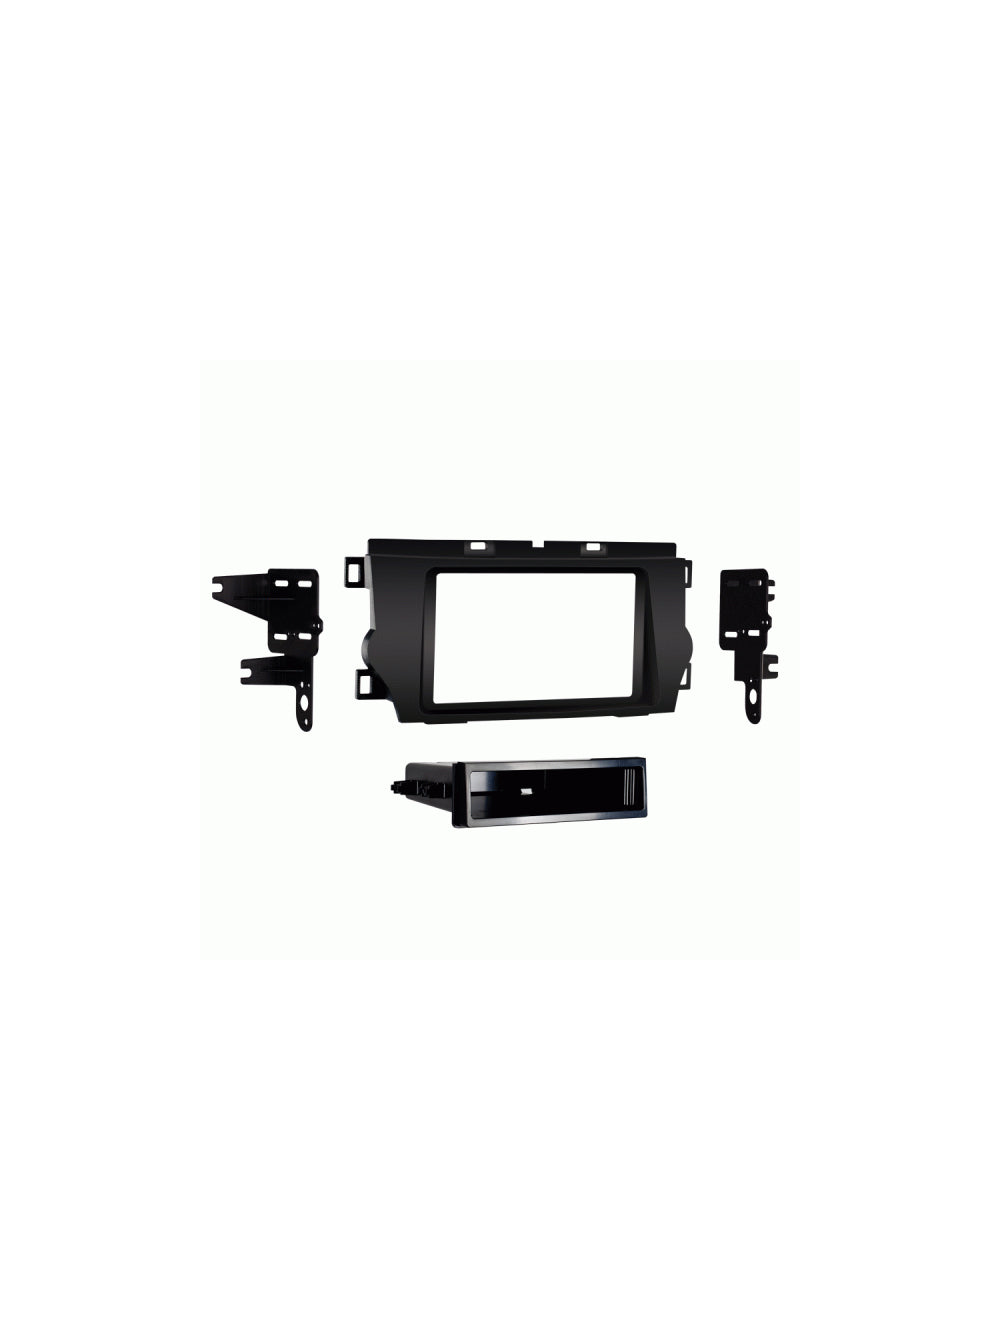 Metra 99-8233B DIN Dash Installation Kit for 2011-Up Toyota Avalon Single or Double